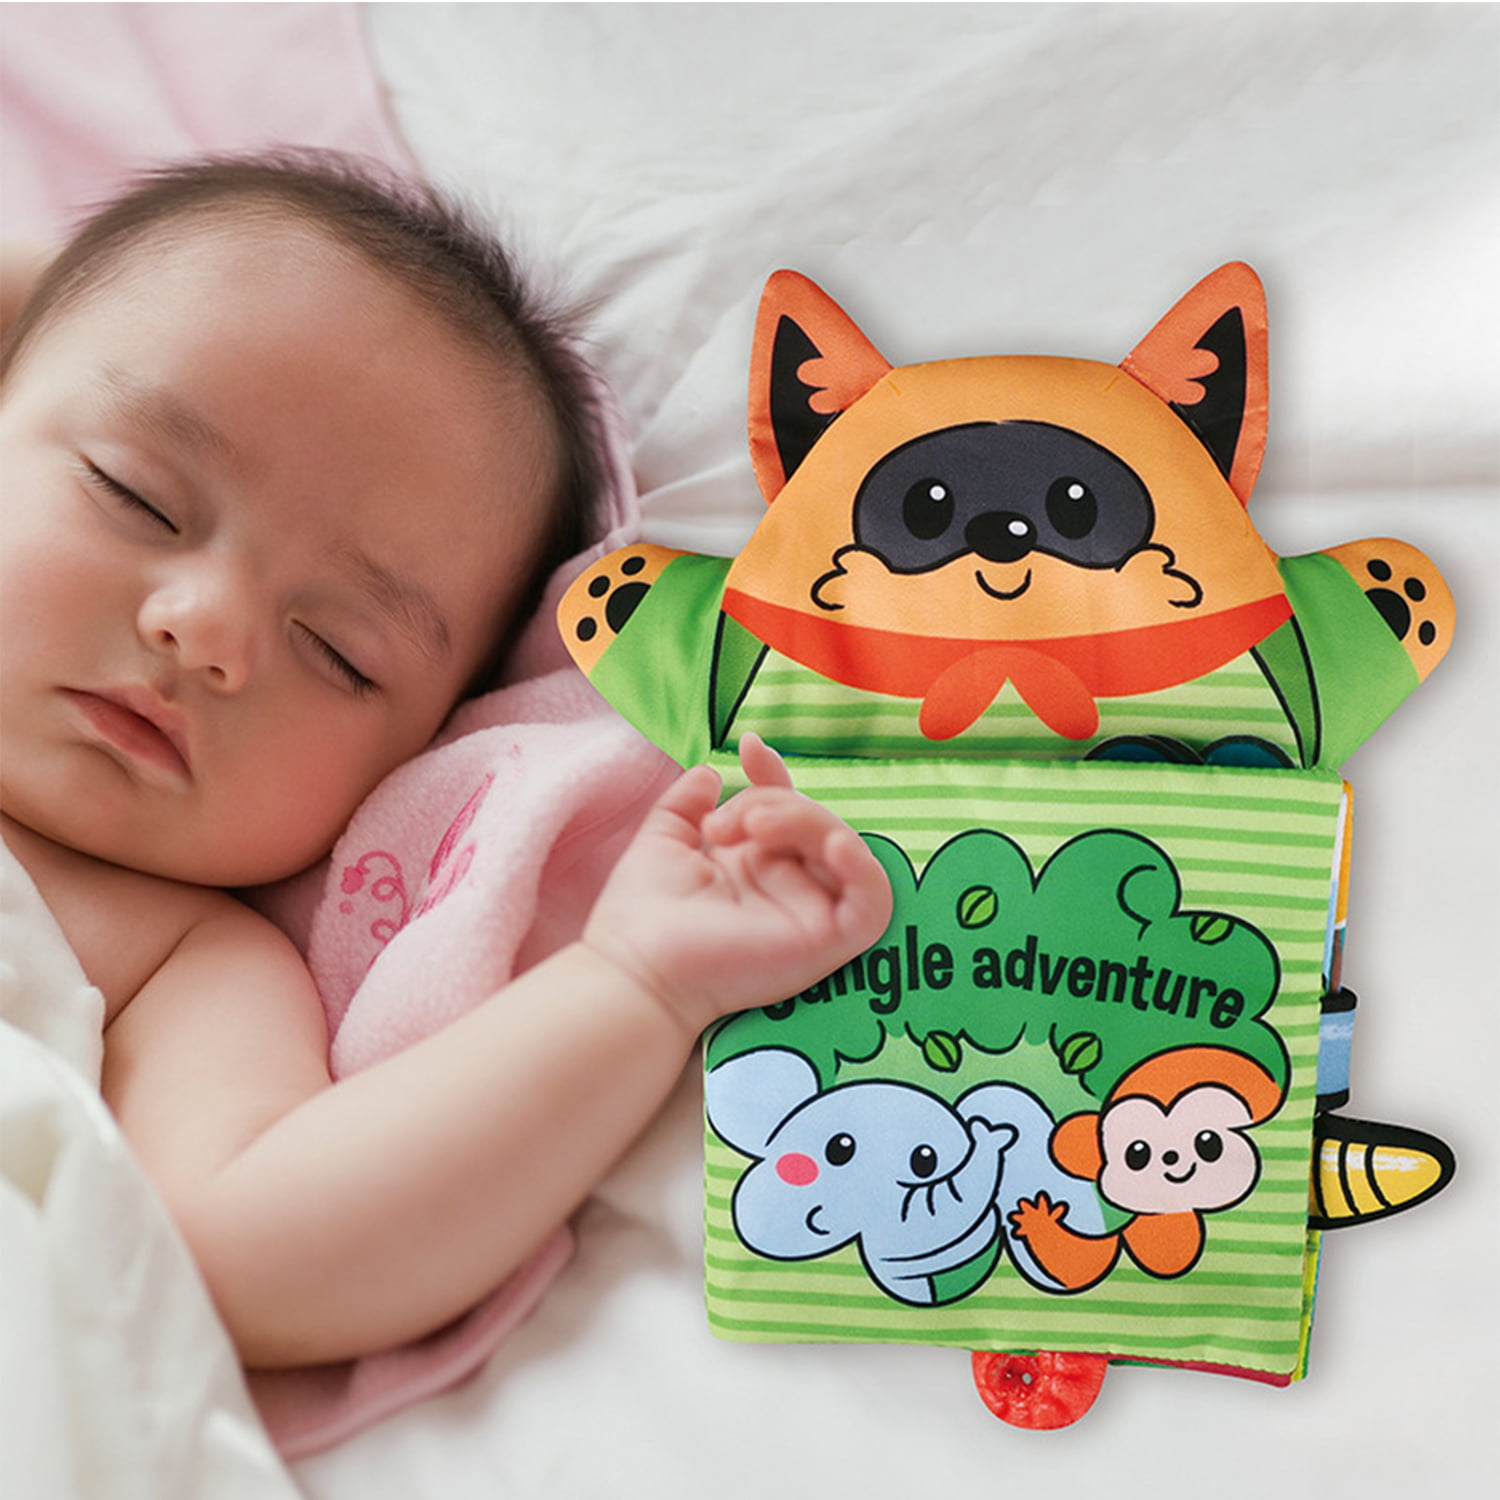 CUTE STONE Soft Baby Book & Ball Rattle Toys,Cloth Book with Crinkly Sounds,Animal Tail,Finger Puppet,Baby Rattle Set,Fun Interactive Toy,Touch and Feel Fabric Book Set for Baby Girls Boys Infant 